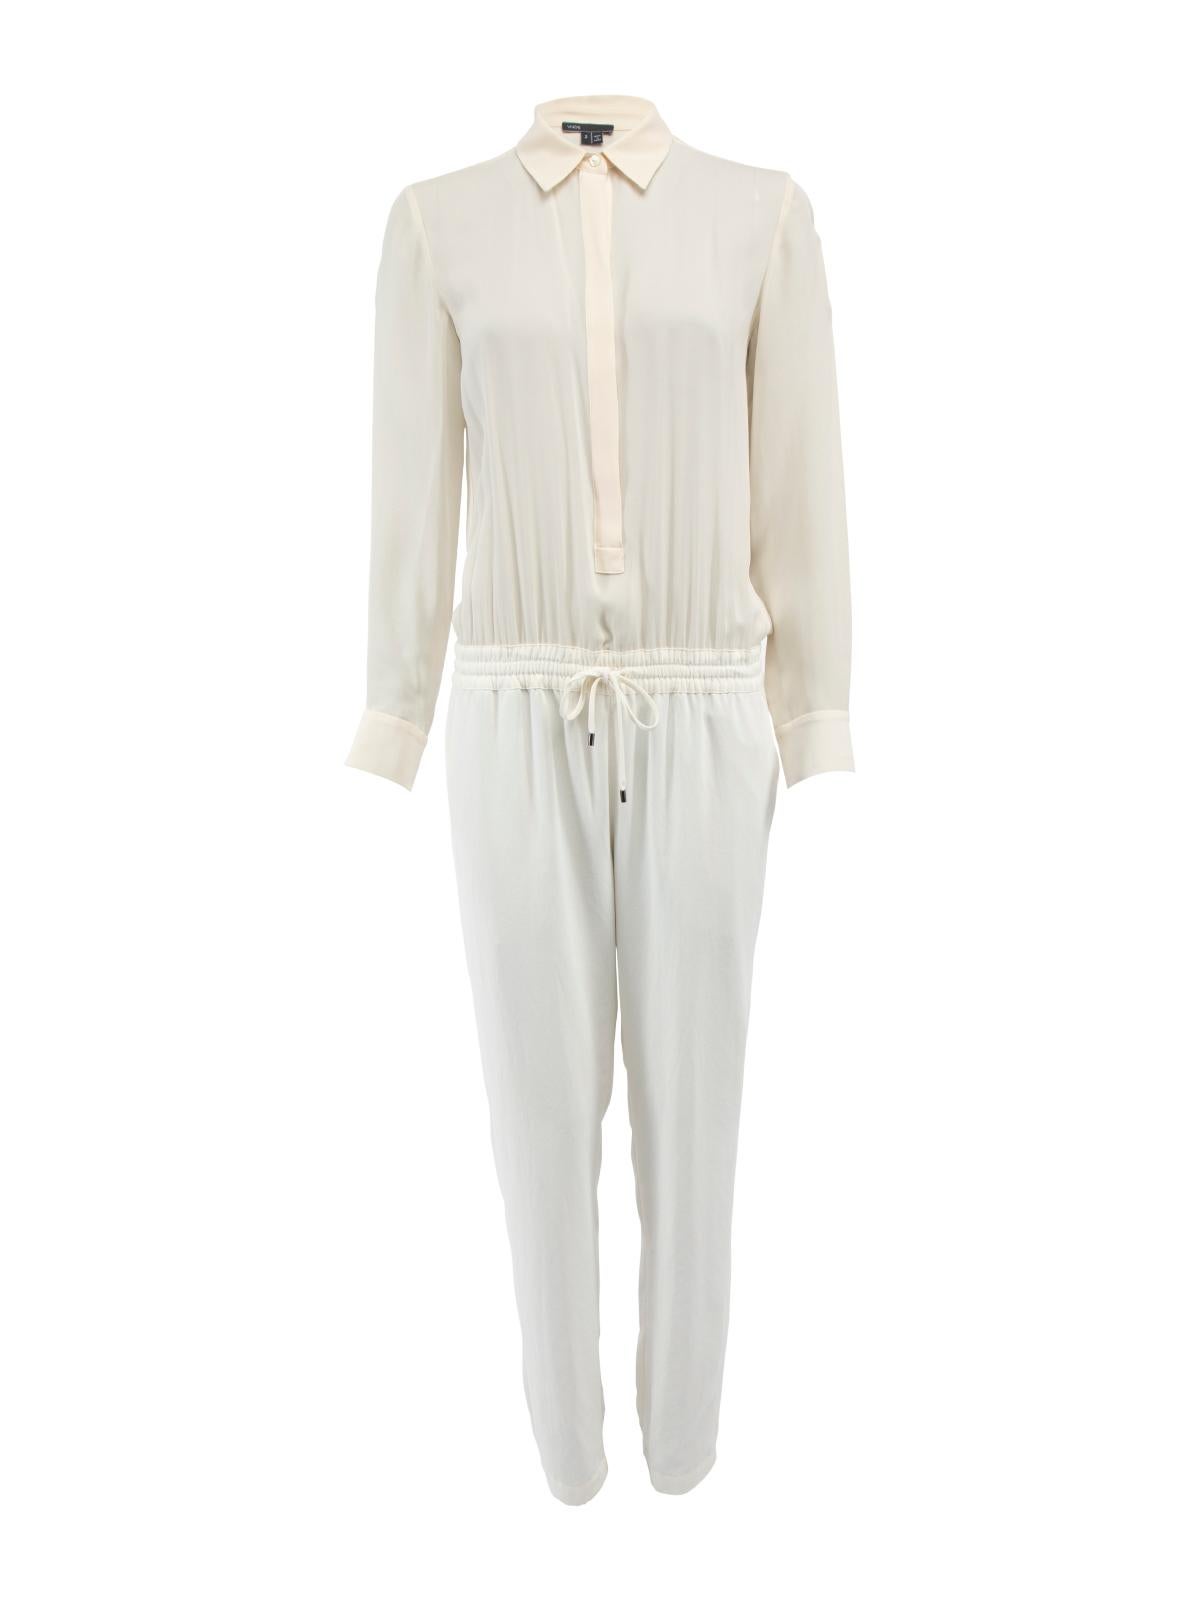 Pre-Loved Vince Women''s Cream Button Up Collared Jumpsuit with Drawstring Waist For Sale